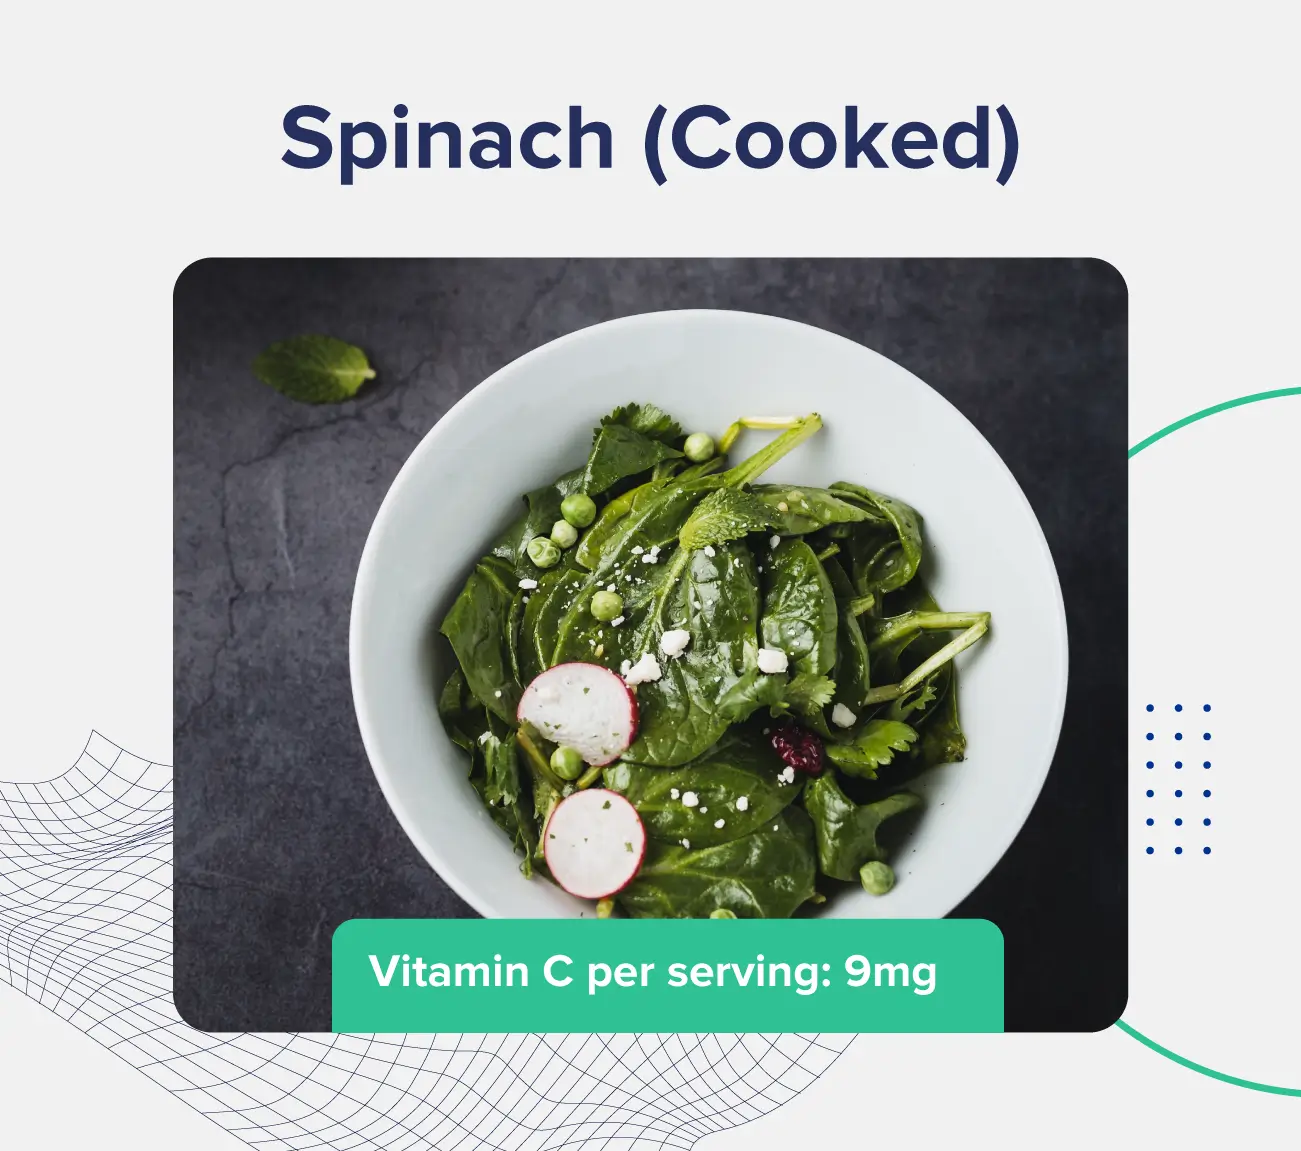 A graphic entitled "spinach (cooked)" depicting a bowl of cooked spinach and a description of the vitamin C content (9 milligrams per serving)